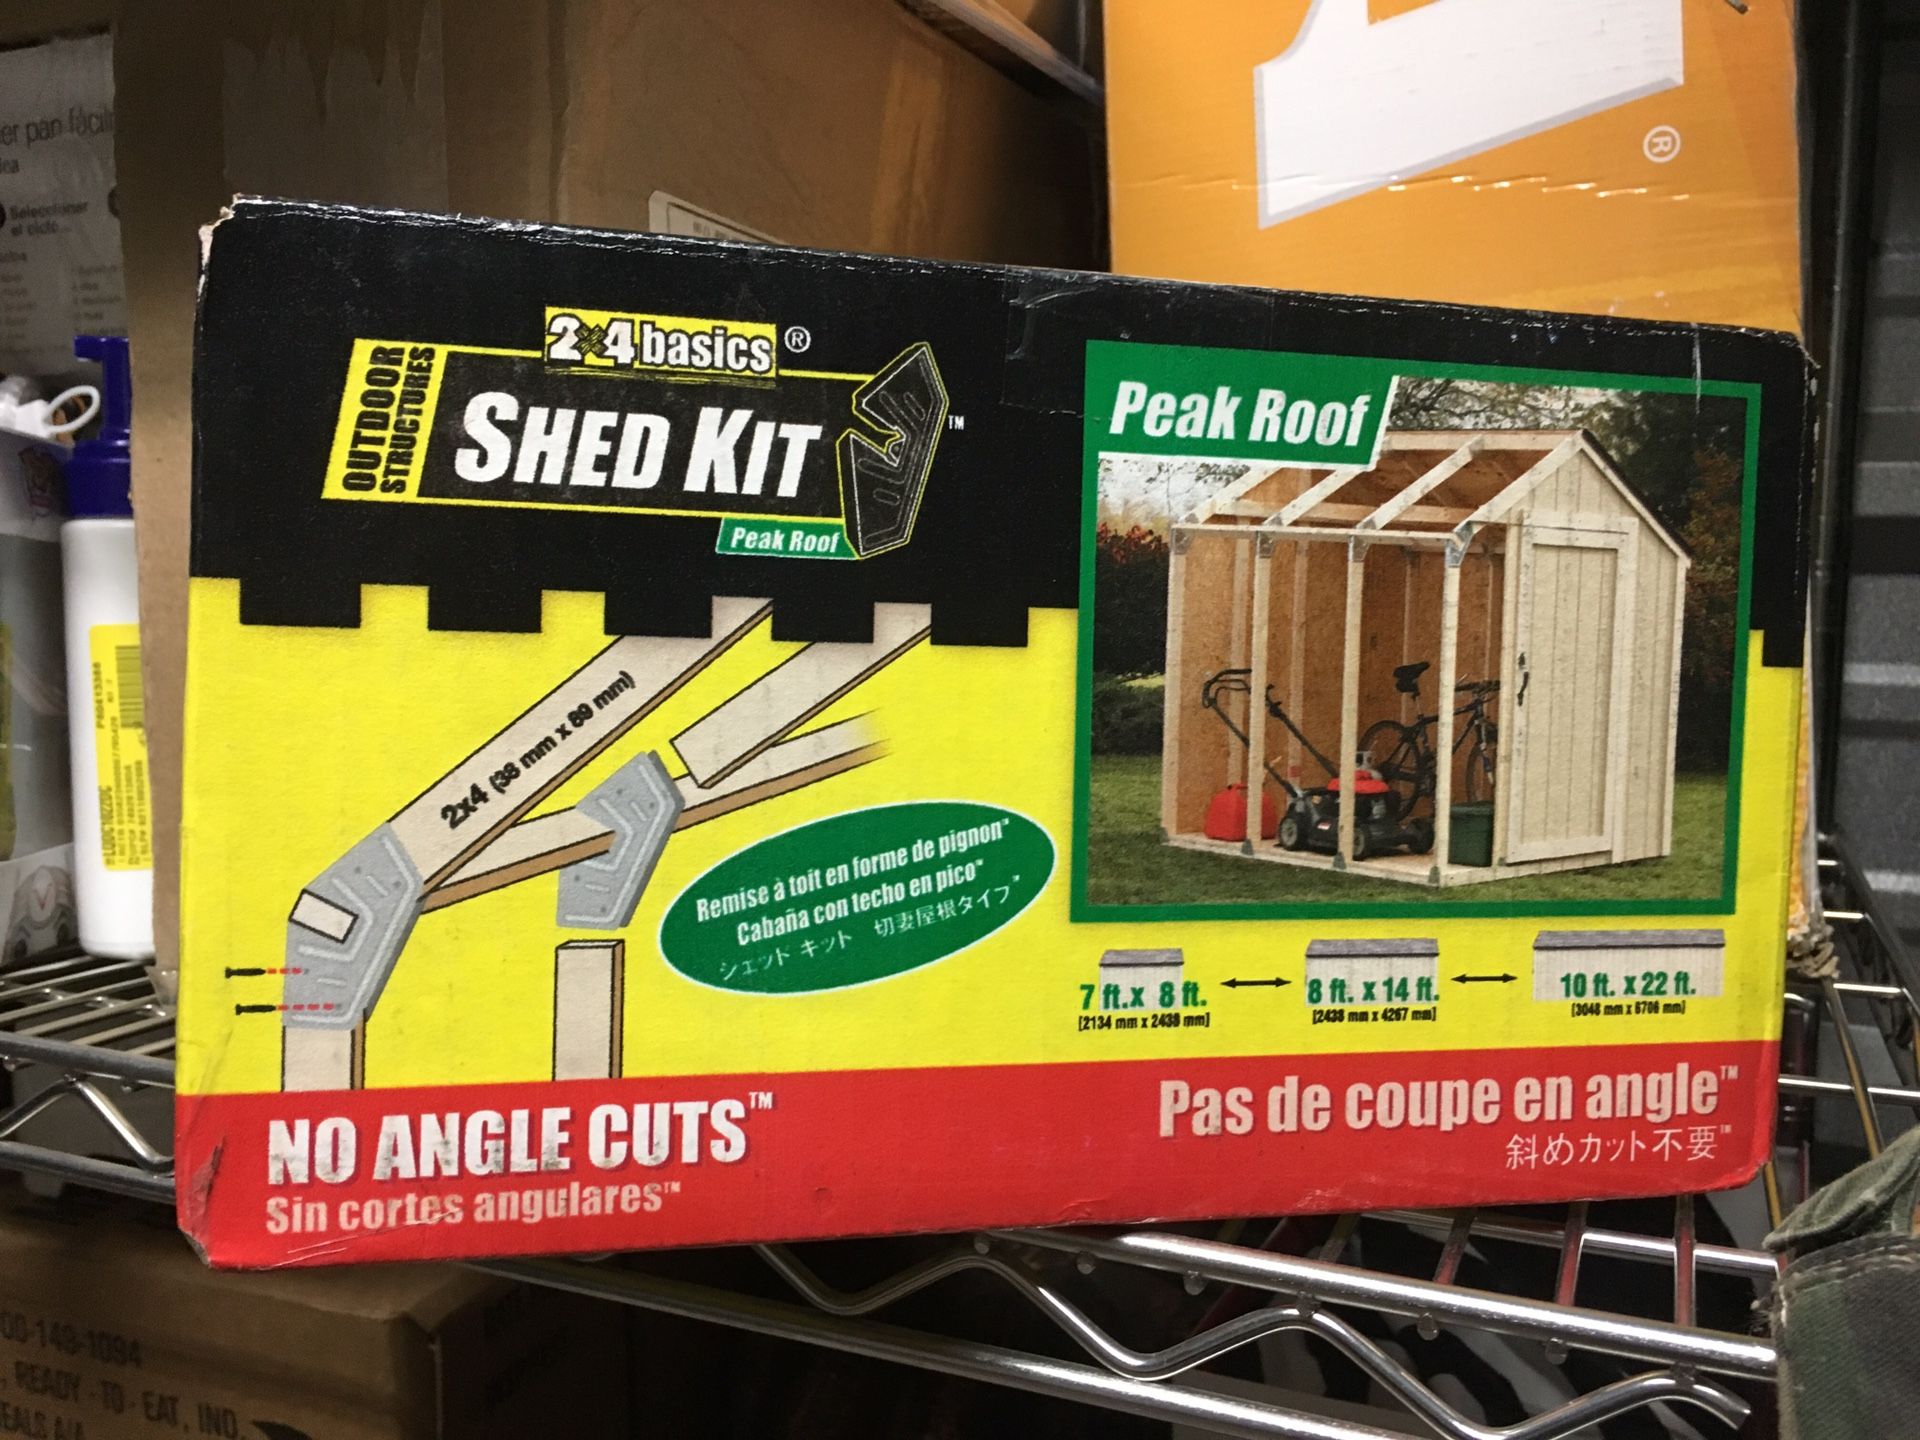 New in box, Hopkins Peak Roof Shed Kit